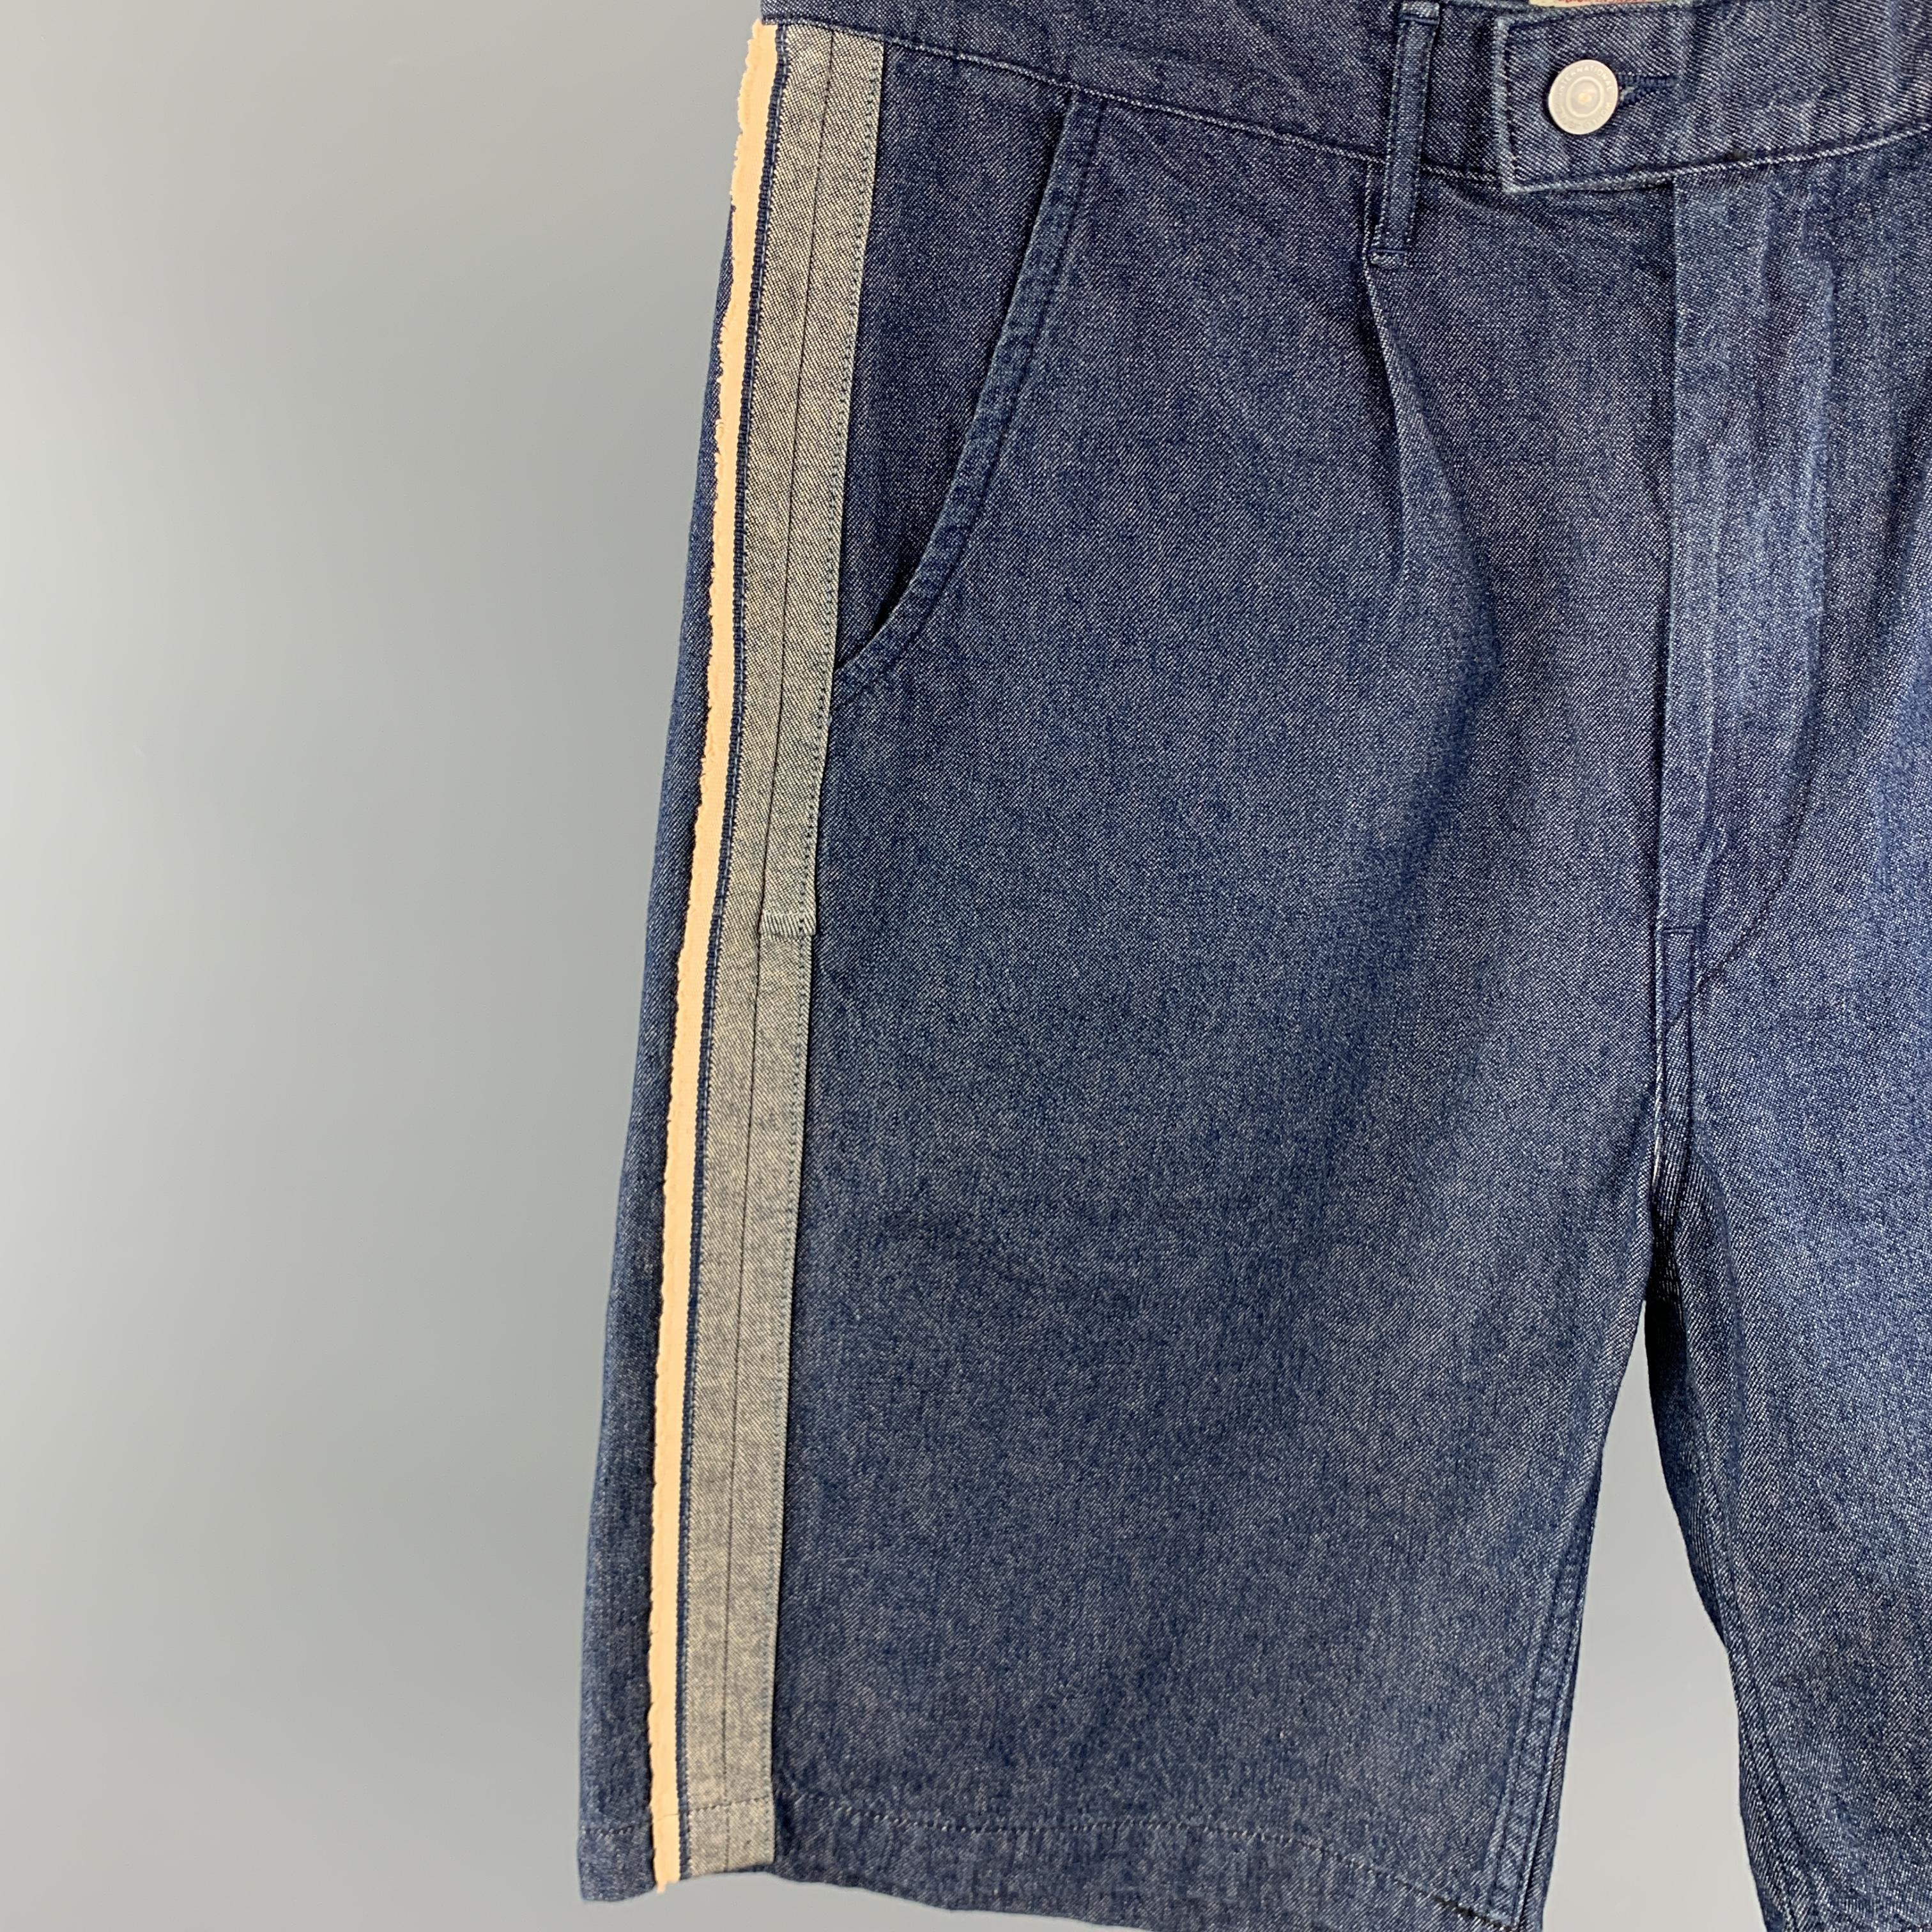 KAPITAL Shorts comes in a indigo cotton featuring side pleated details, contrast stitching, and a zip fly closure. Made in Japan. 

New With Tags.
Marked: 4

Original Retail Price: $218.00

Measurements:

Waist: 34 in. 
Rise: 12 in. 
Inseam: 9 in. 

